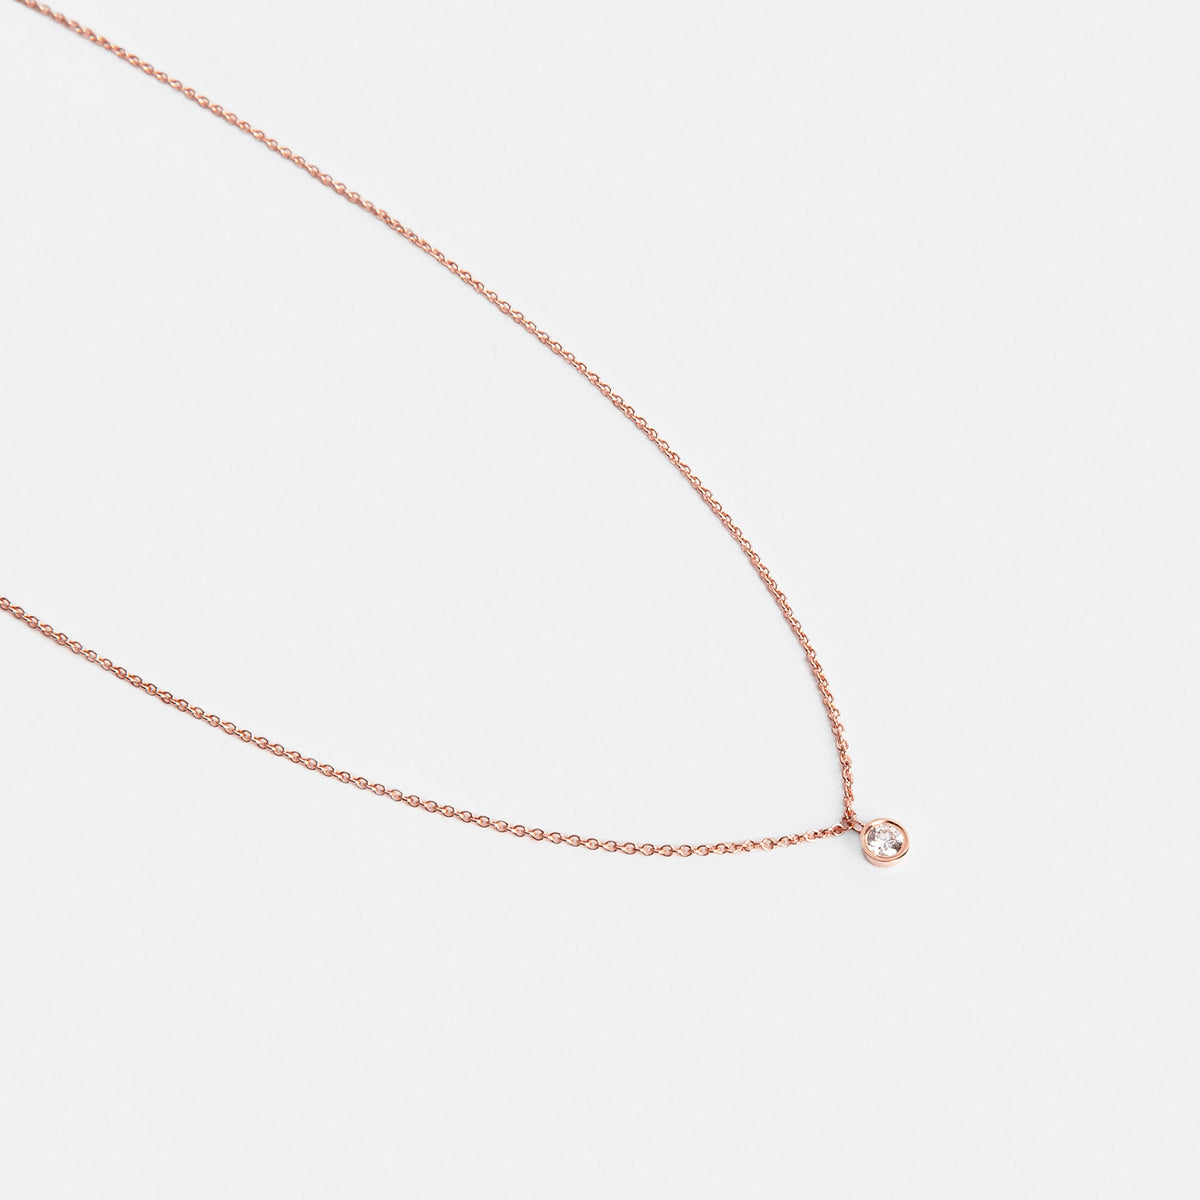 Large Kaya Handmade Necklace in 14k Rose Gold set with White Diamond By SHW Fine Jewelry NYC